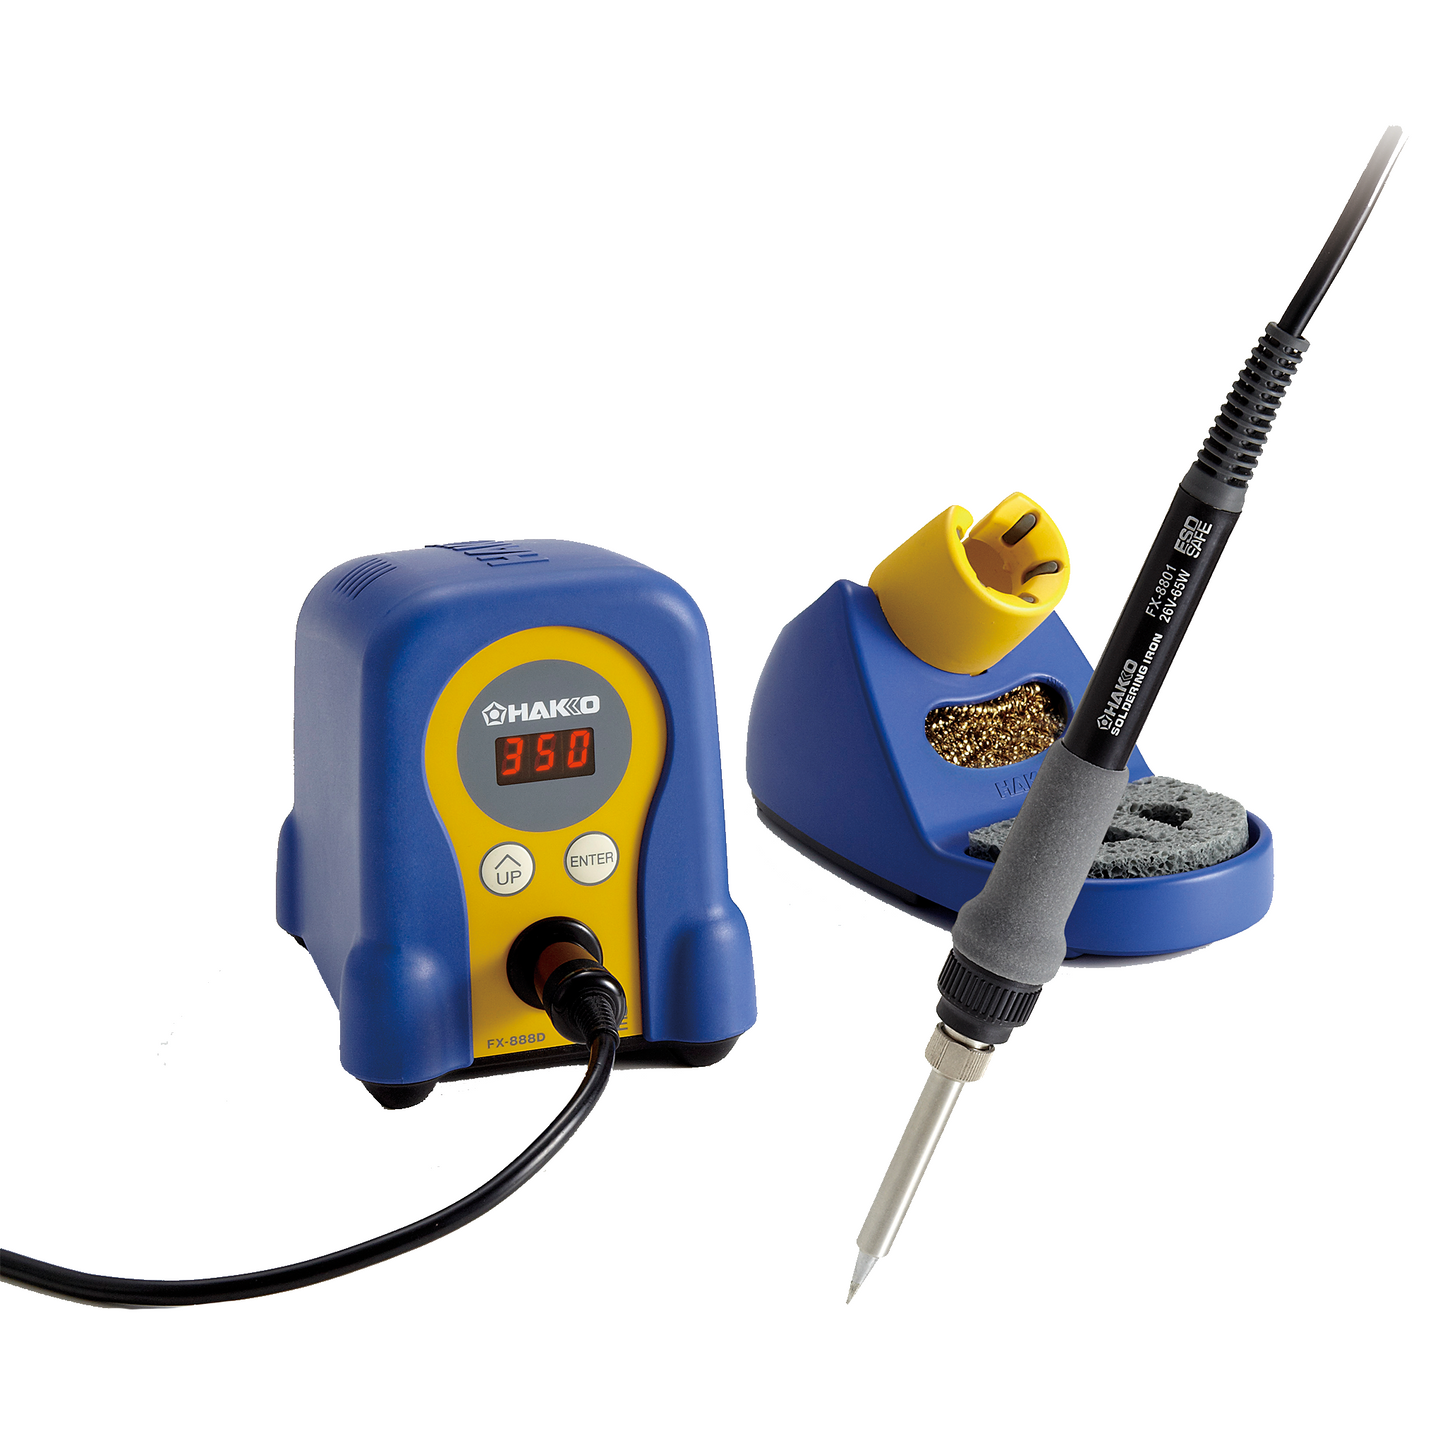 Hakko digital soldering station FX888D 70W optional N2 soldering iron, hot tweezer rework tool, heavy duty soldering. successor of Hakko 936/937. for pcb assembly production process, lead free, ESD safe, RoHS compliant